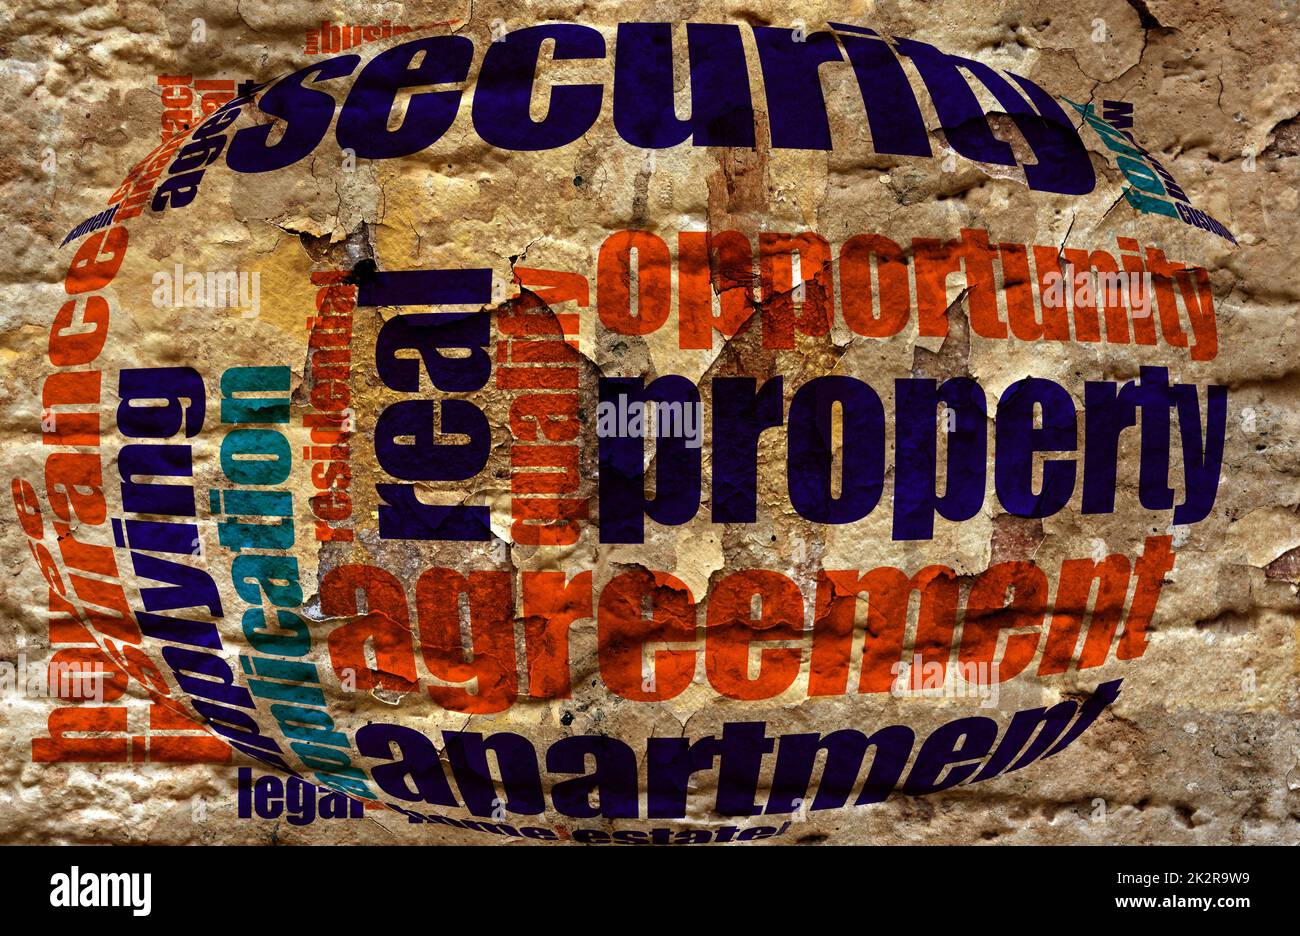 Security agreement word cloud Stock Photo